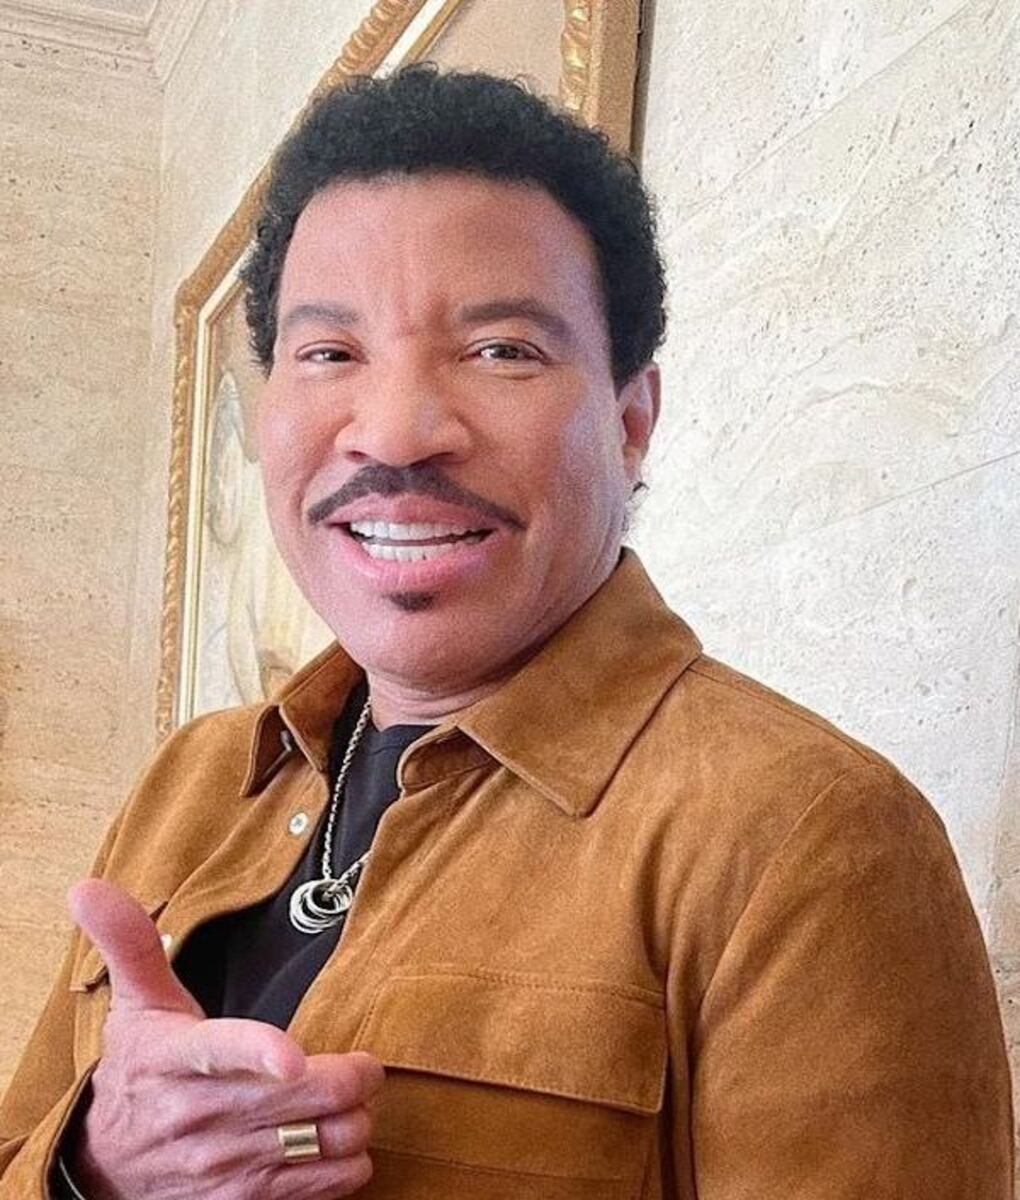 American-Idol-Lionel-Richie-Brown-Suede-Leather-Jacket